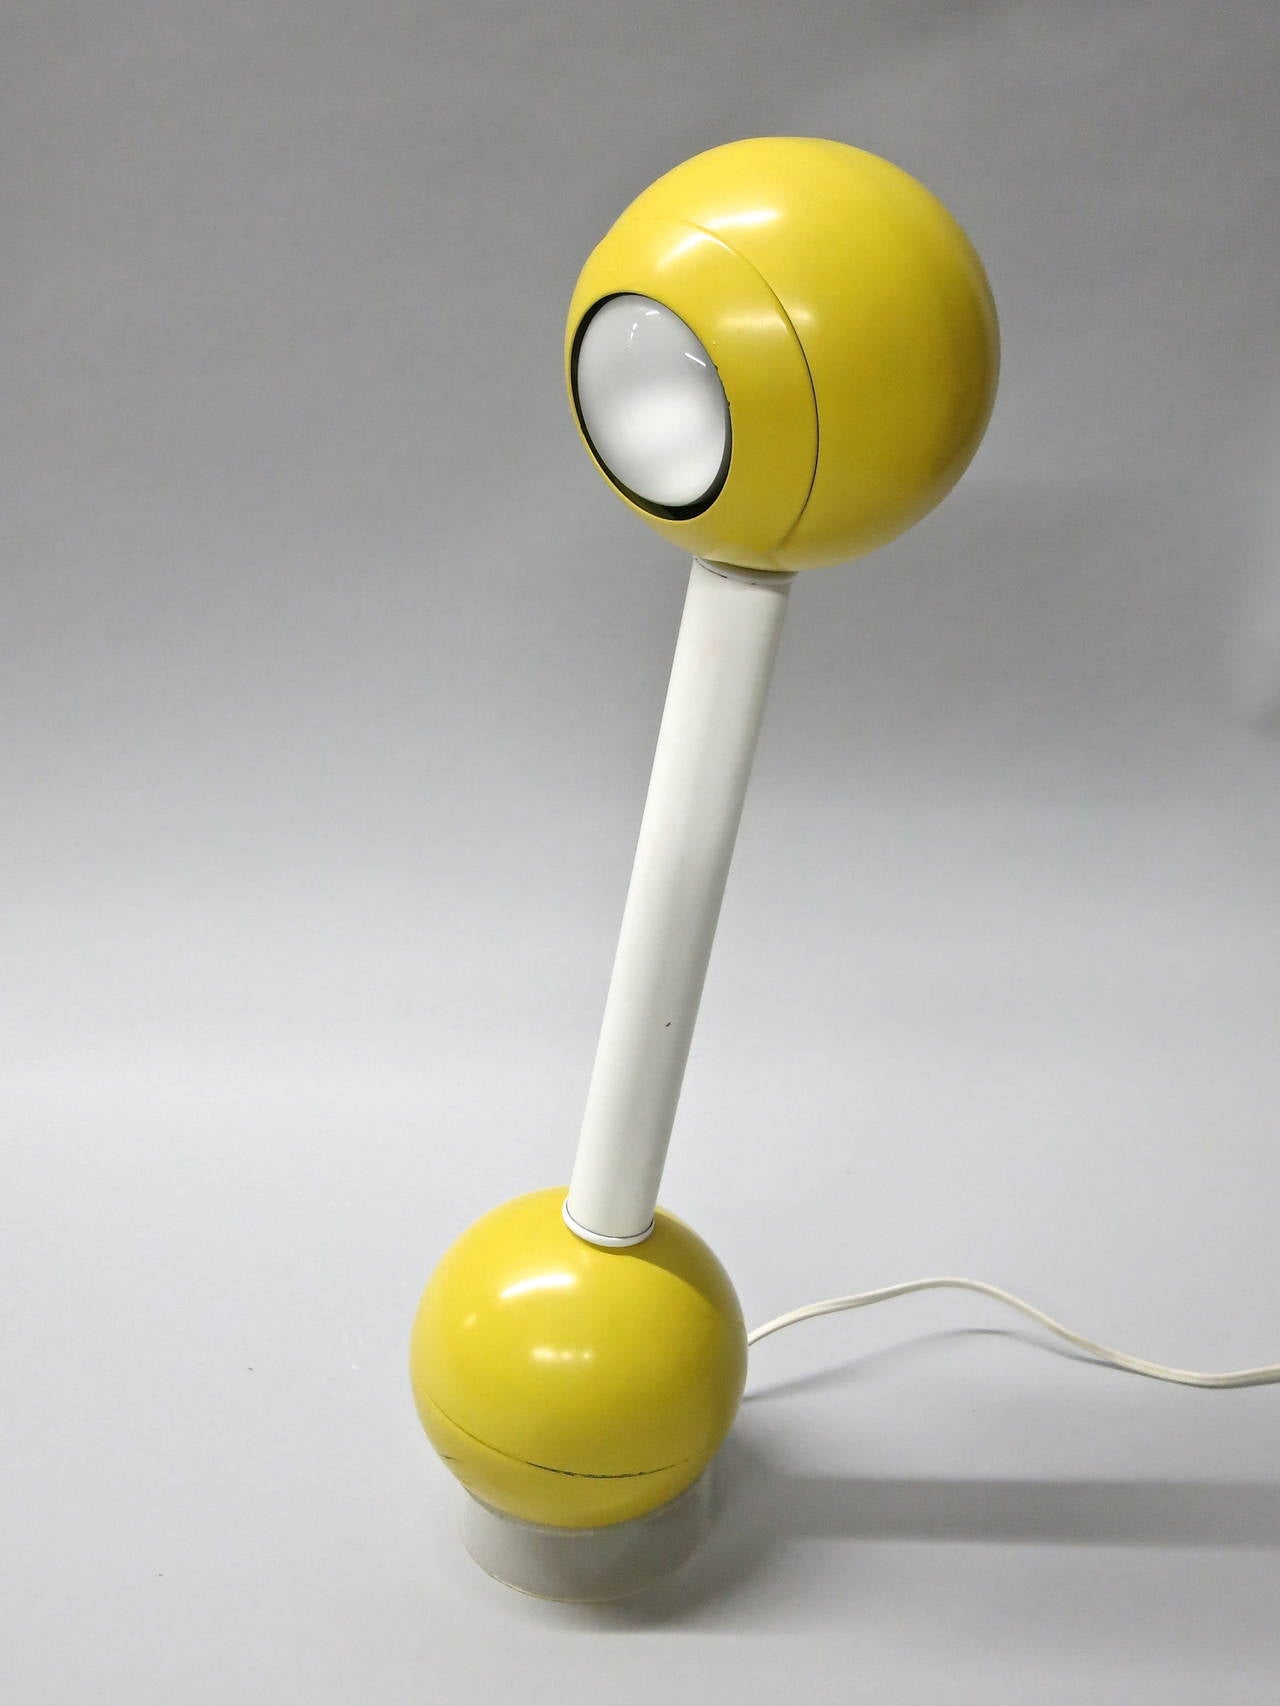 Barbell desk lamp in yellow and white enameled metal that rotates and rests on a lucite base, designed in the 1970s by John Mascheroni for Kovacs